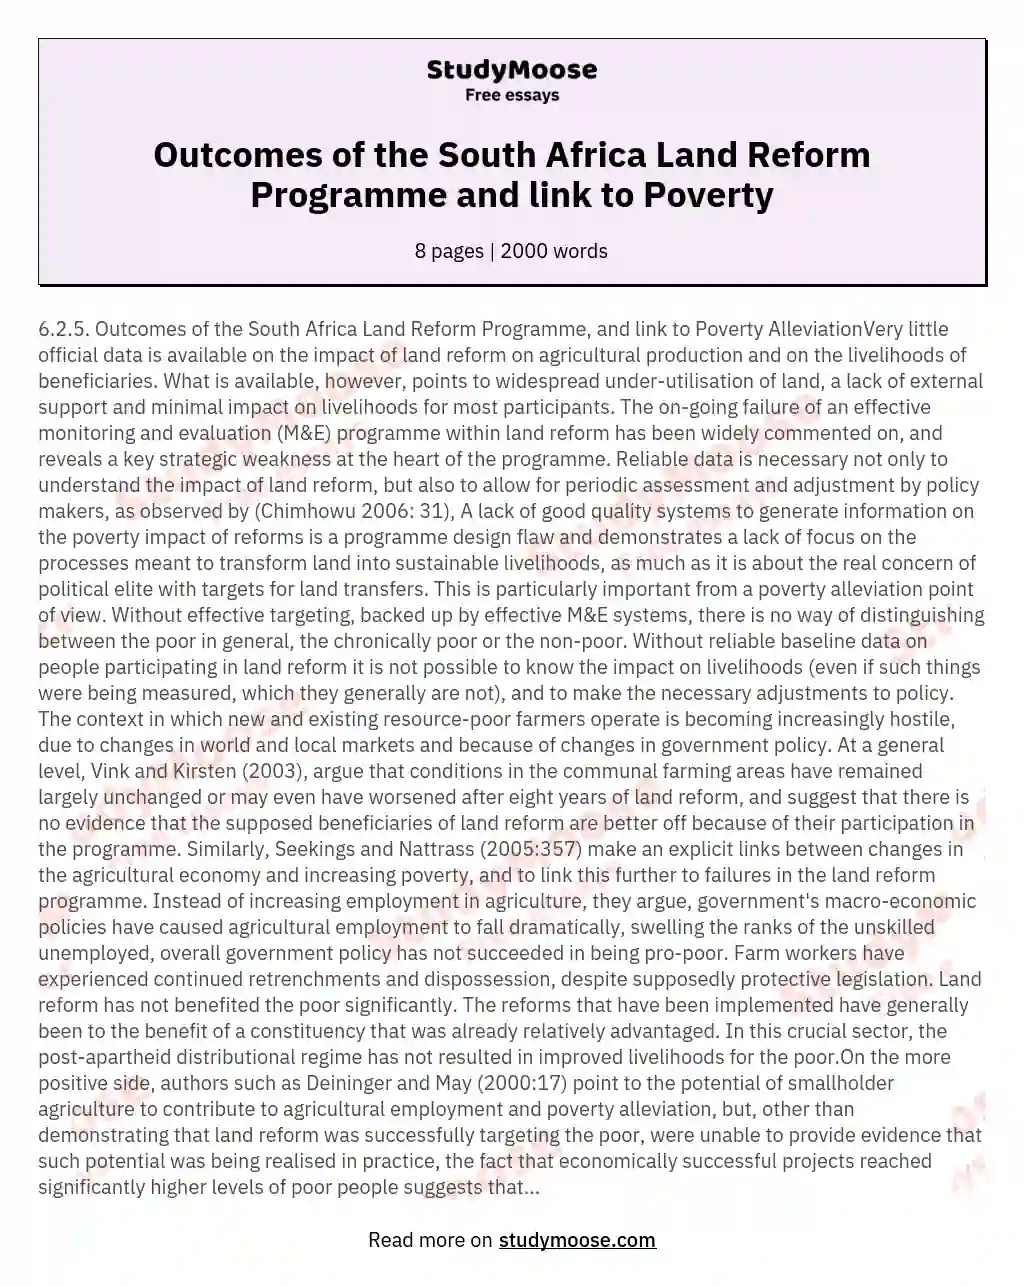 Outcomes of the South Africa Land Reform Programme and link to Poverty